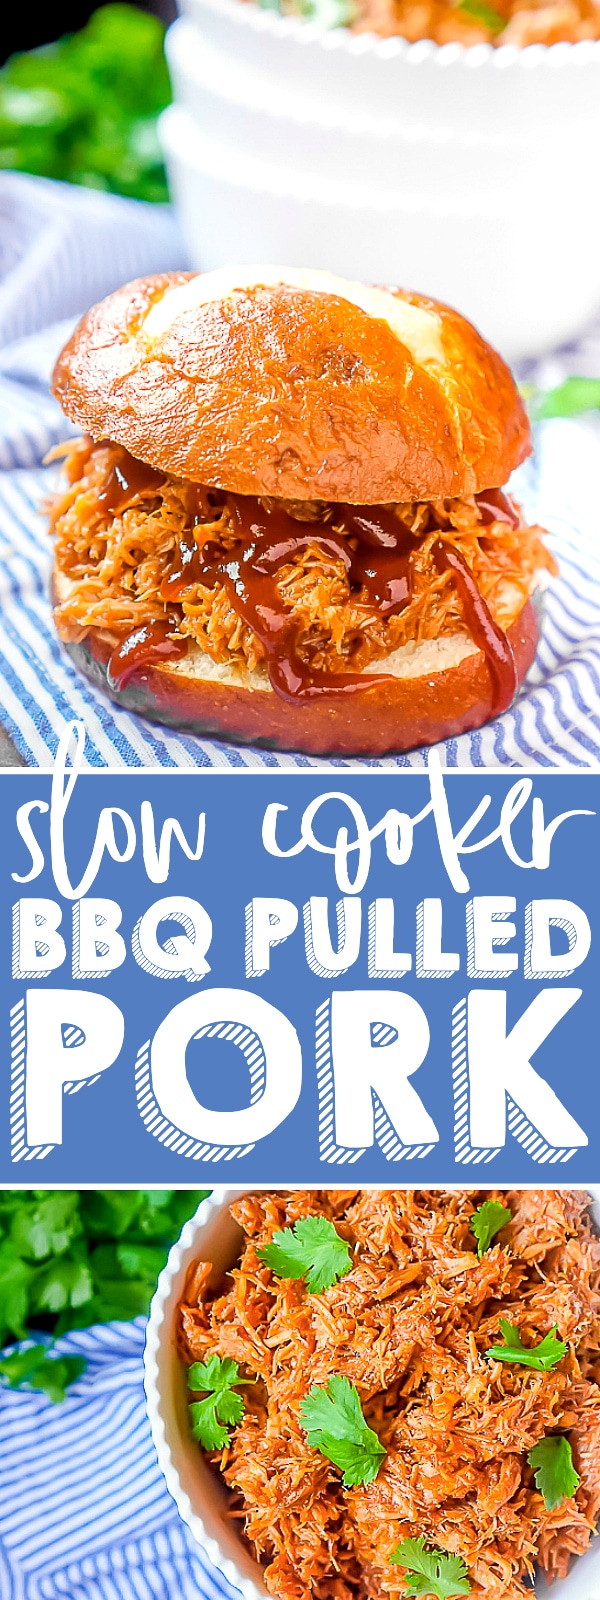 This 4 Ingredient Slow Cooker BBQ Pulled Pork Recipe is an incredibly easy family dinner recipe that is also perfect for party menus, leftovers, and even freezer meals. Don’t love BBQ Sauce? Try tossing in Italian Dressing or enjoying plain! | THE LOVE NERDS #pulledpork #gameday #crockpot